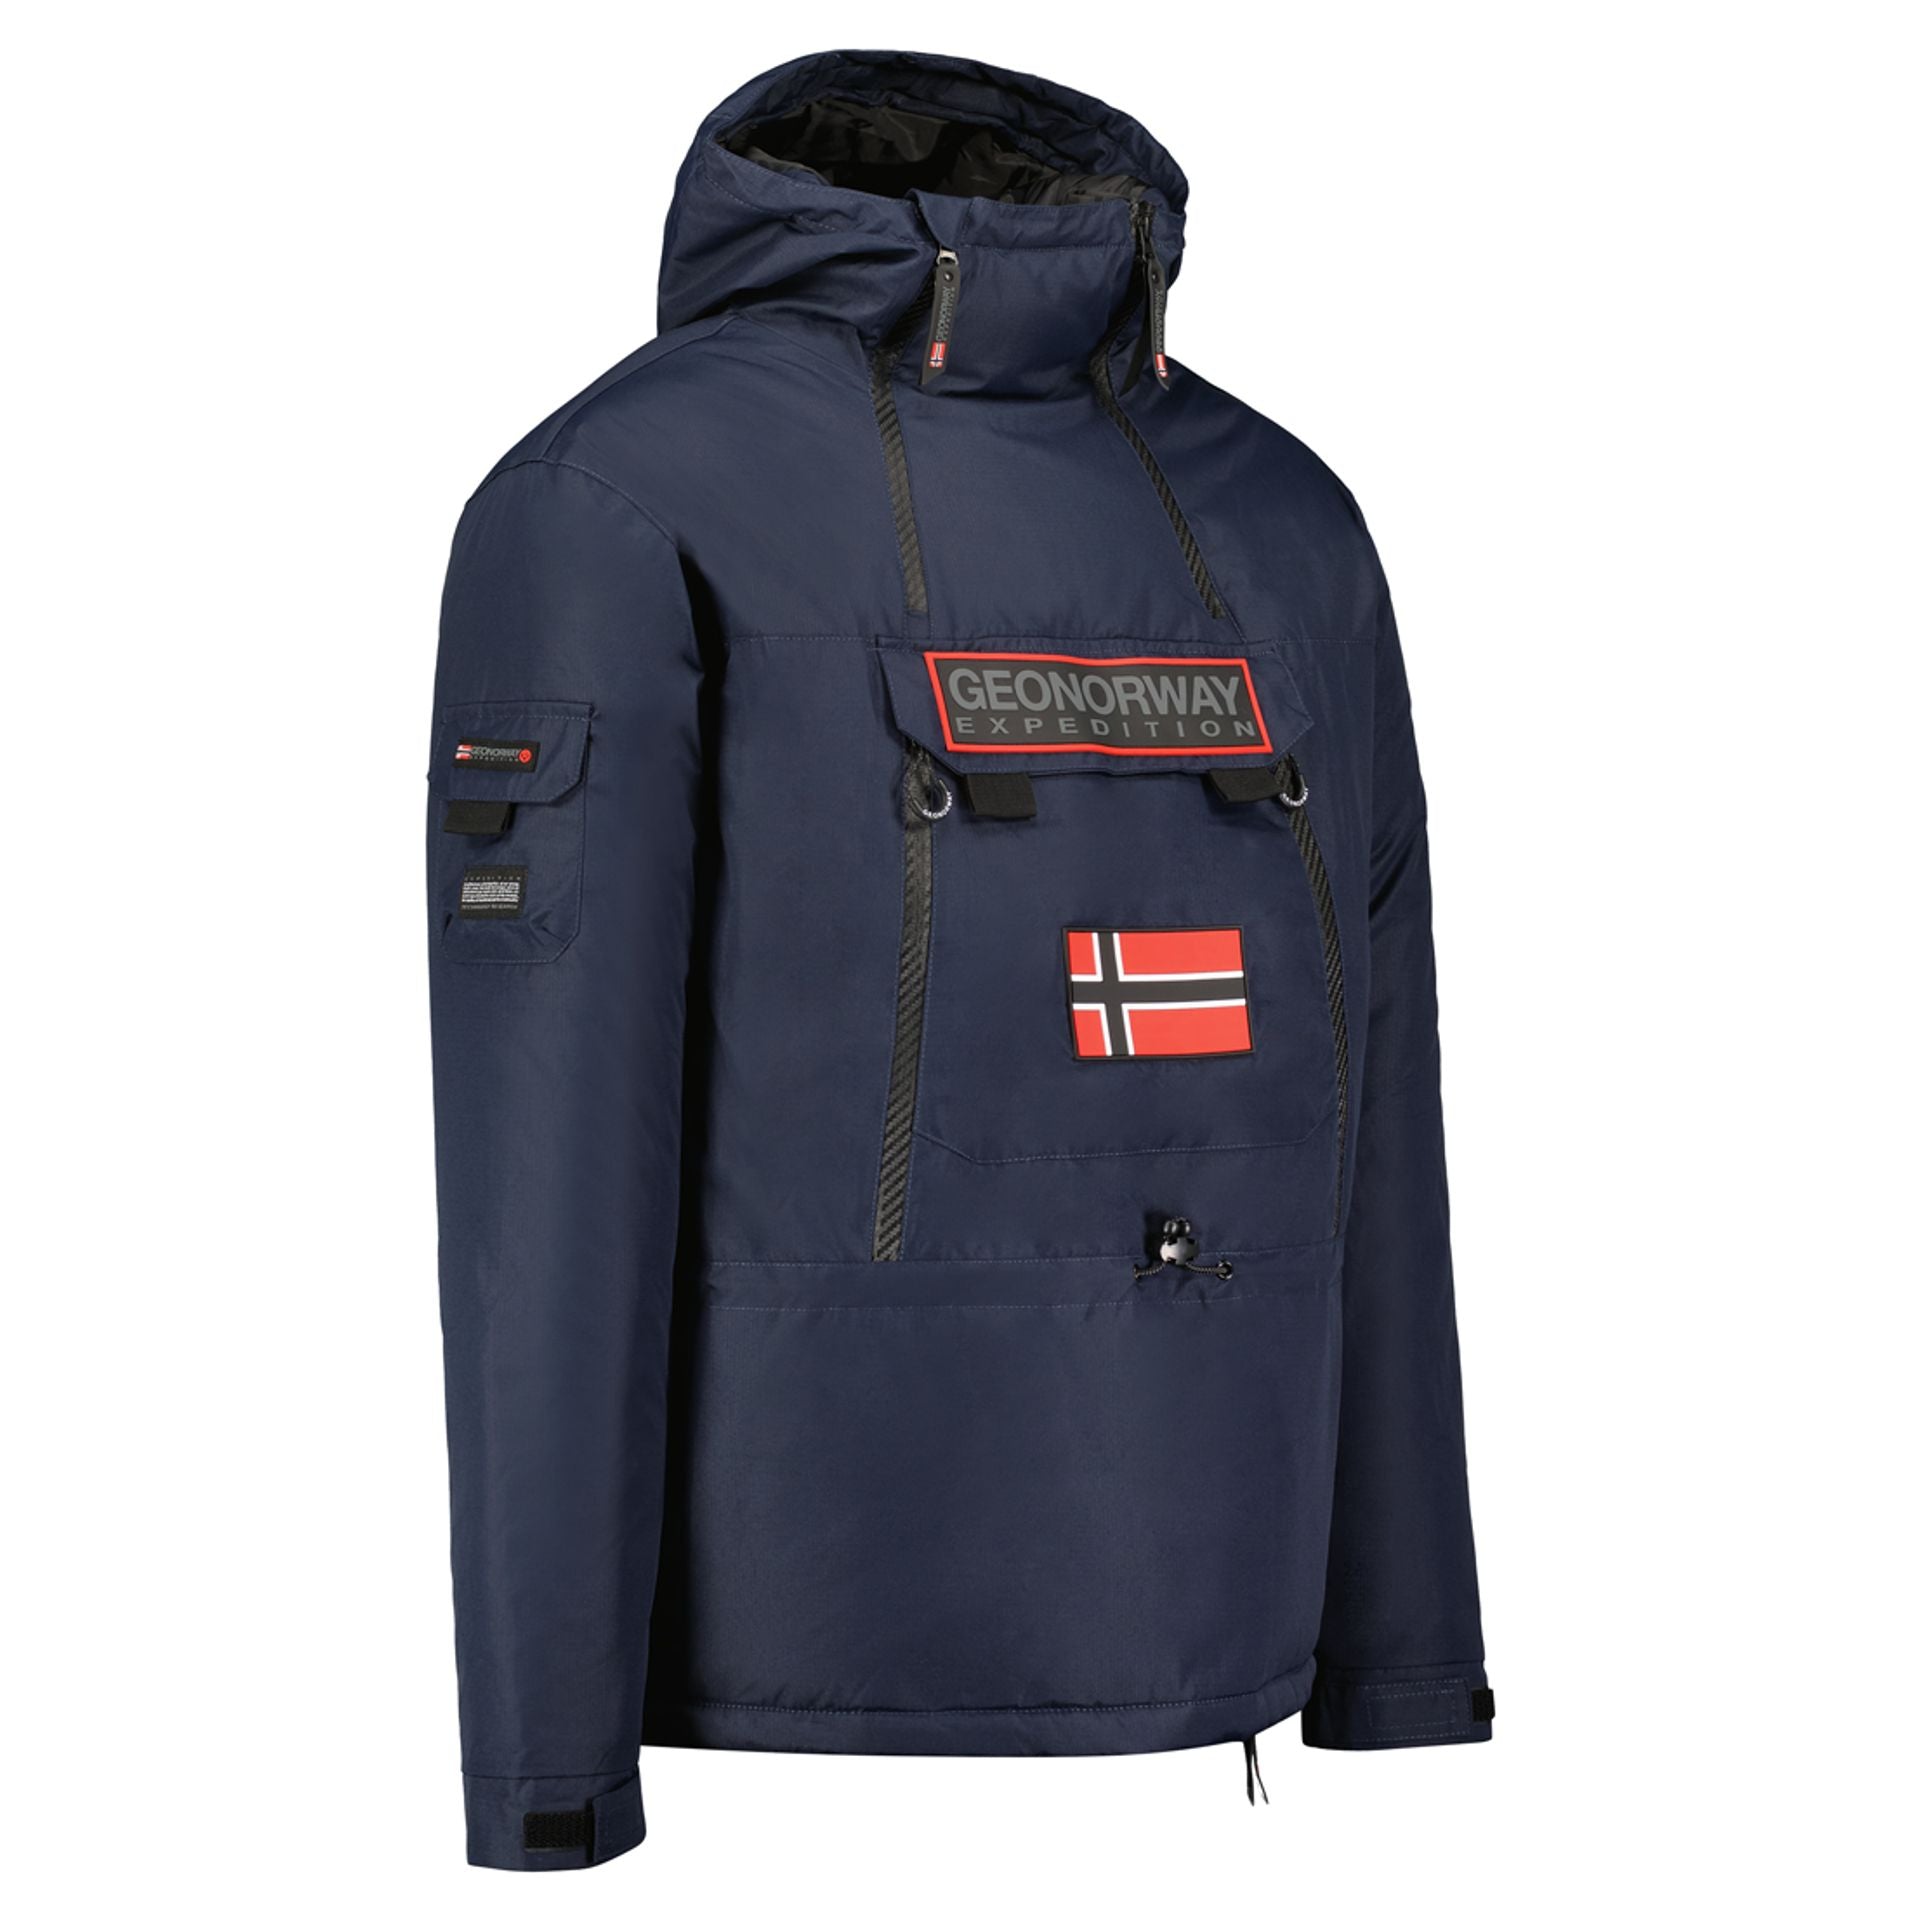 Geographical Norway Jacken 